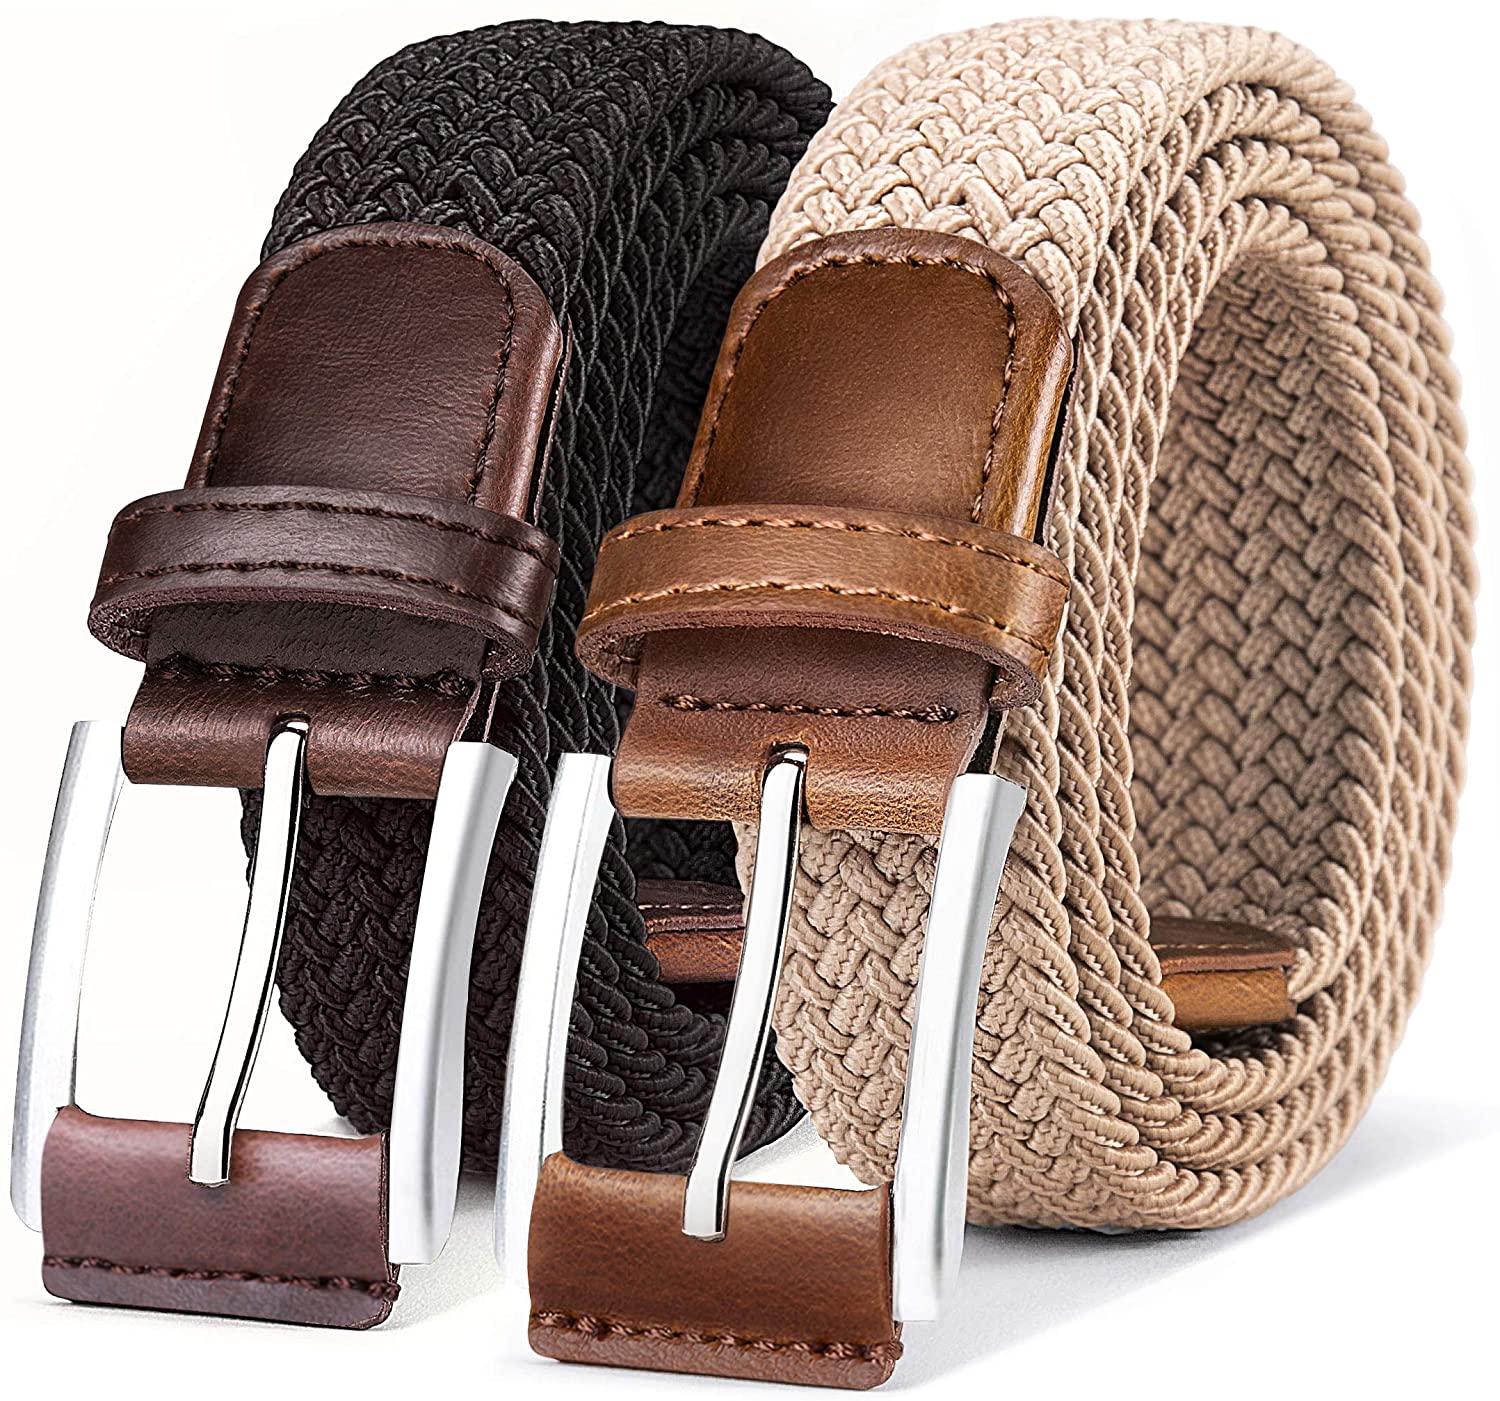 Mens Braided Belts CHAOREN Woven Belt Casual and Dress in Gift Box Braided Leather Belts for Men 2 Pack 1 1/8 